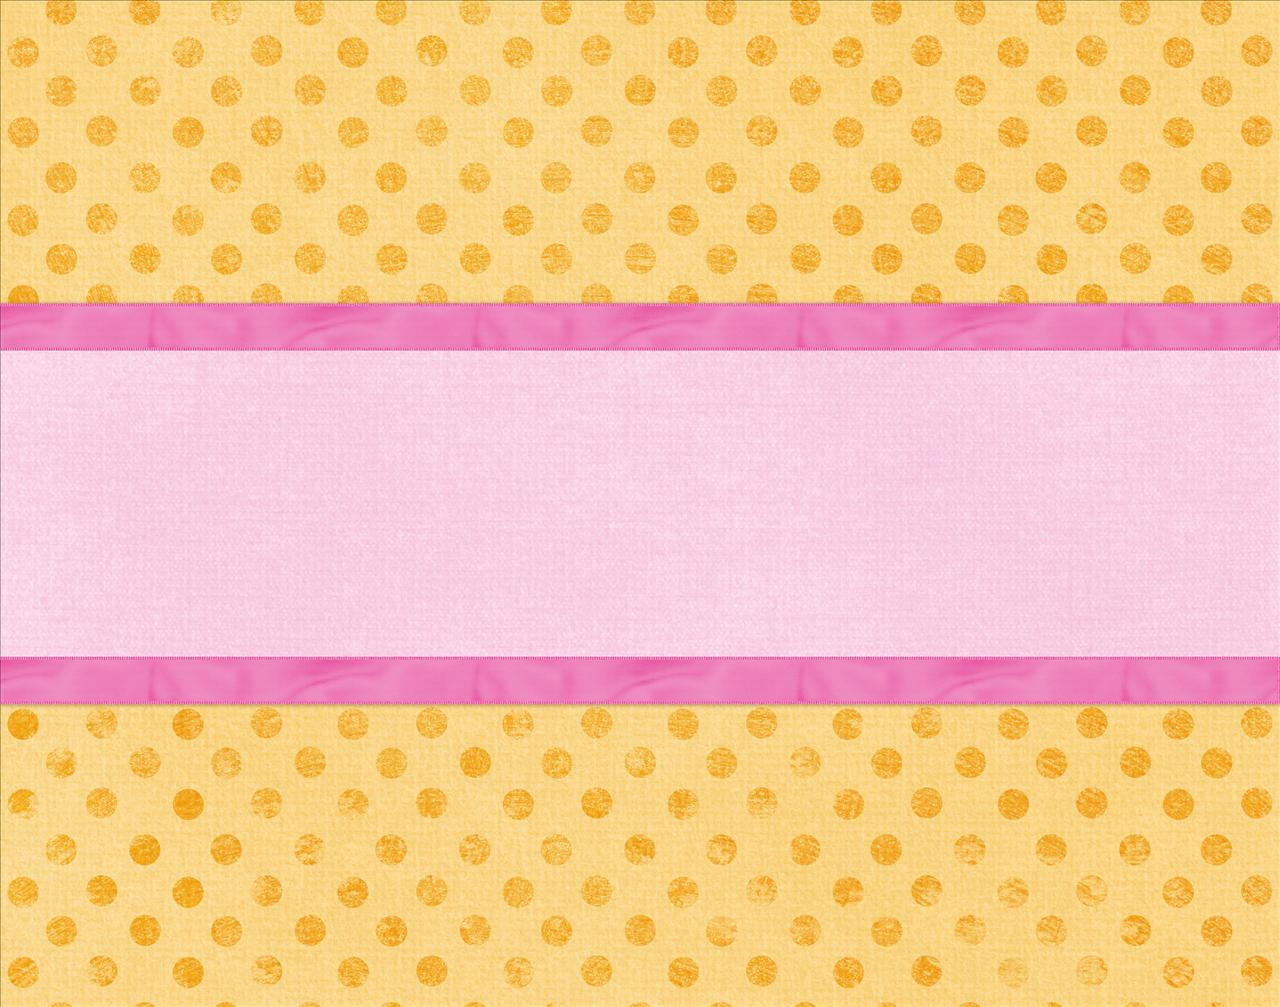 Orange and Pink Backgrounds